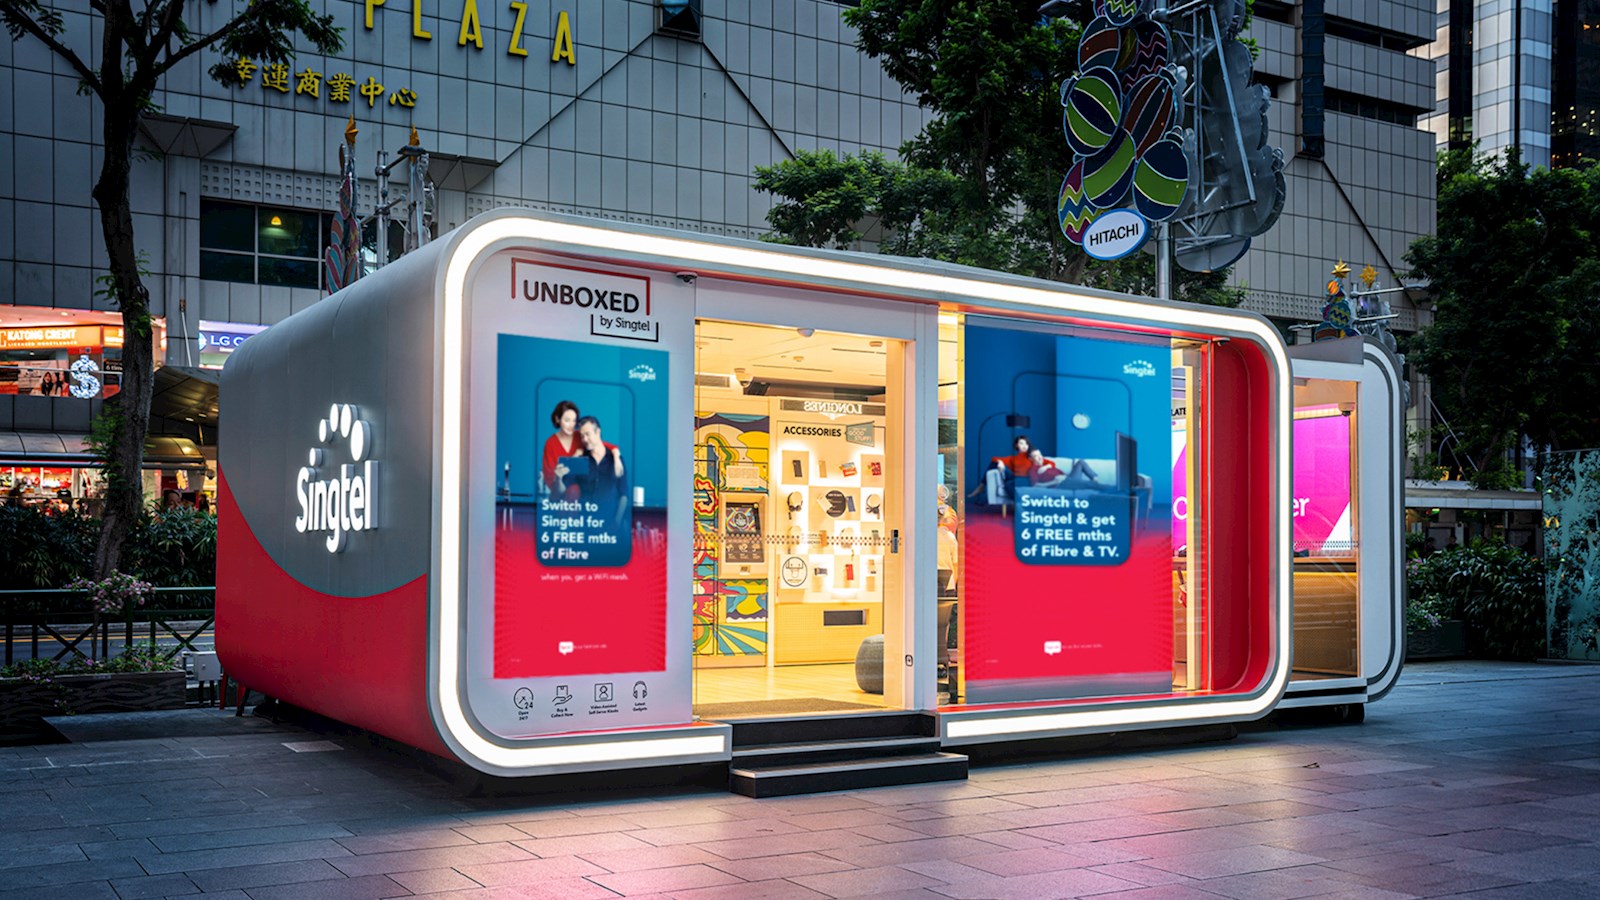 The future of retail formats: pop-ups, pick-ups and unmanned